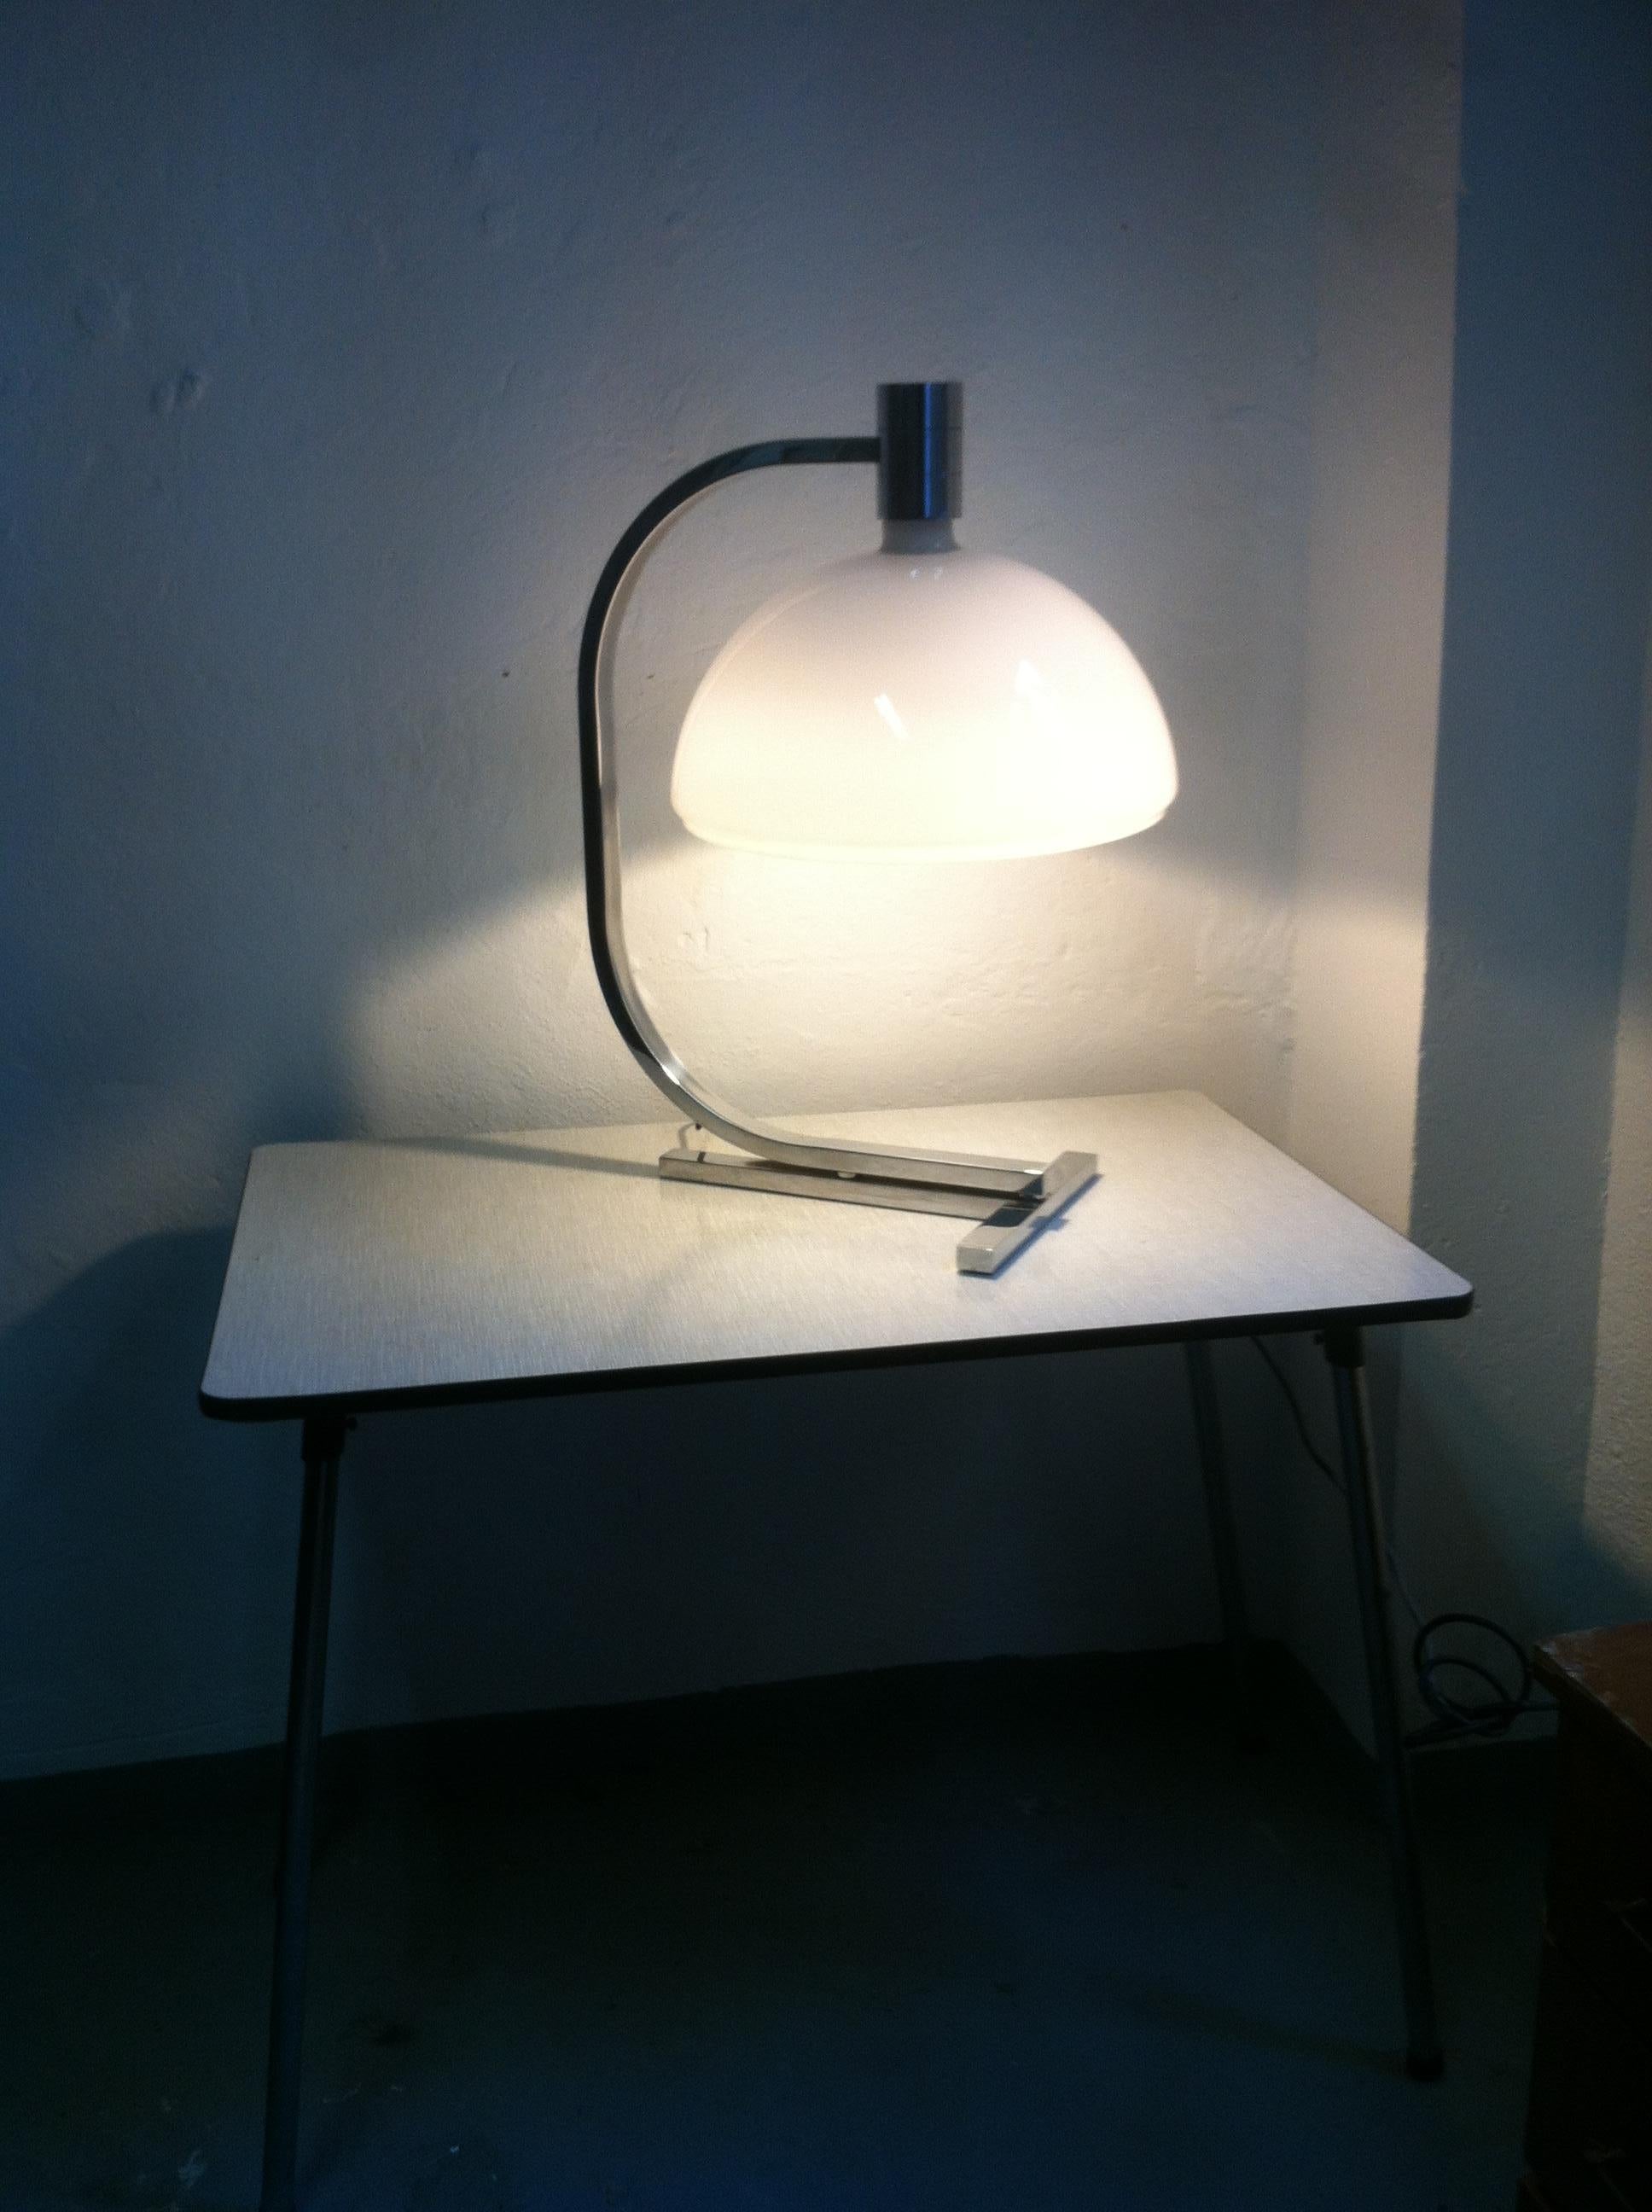 Midcentury AM/AS Table Lamp by Helg, Piva, and Albini for Sirrah Large, 1969 (Opalglas) im Angebot